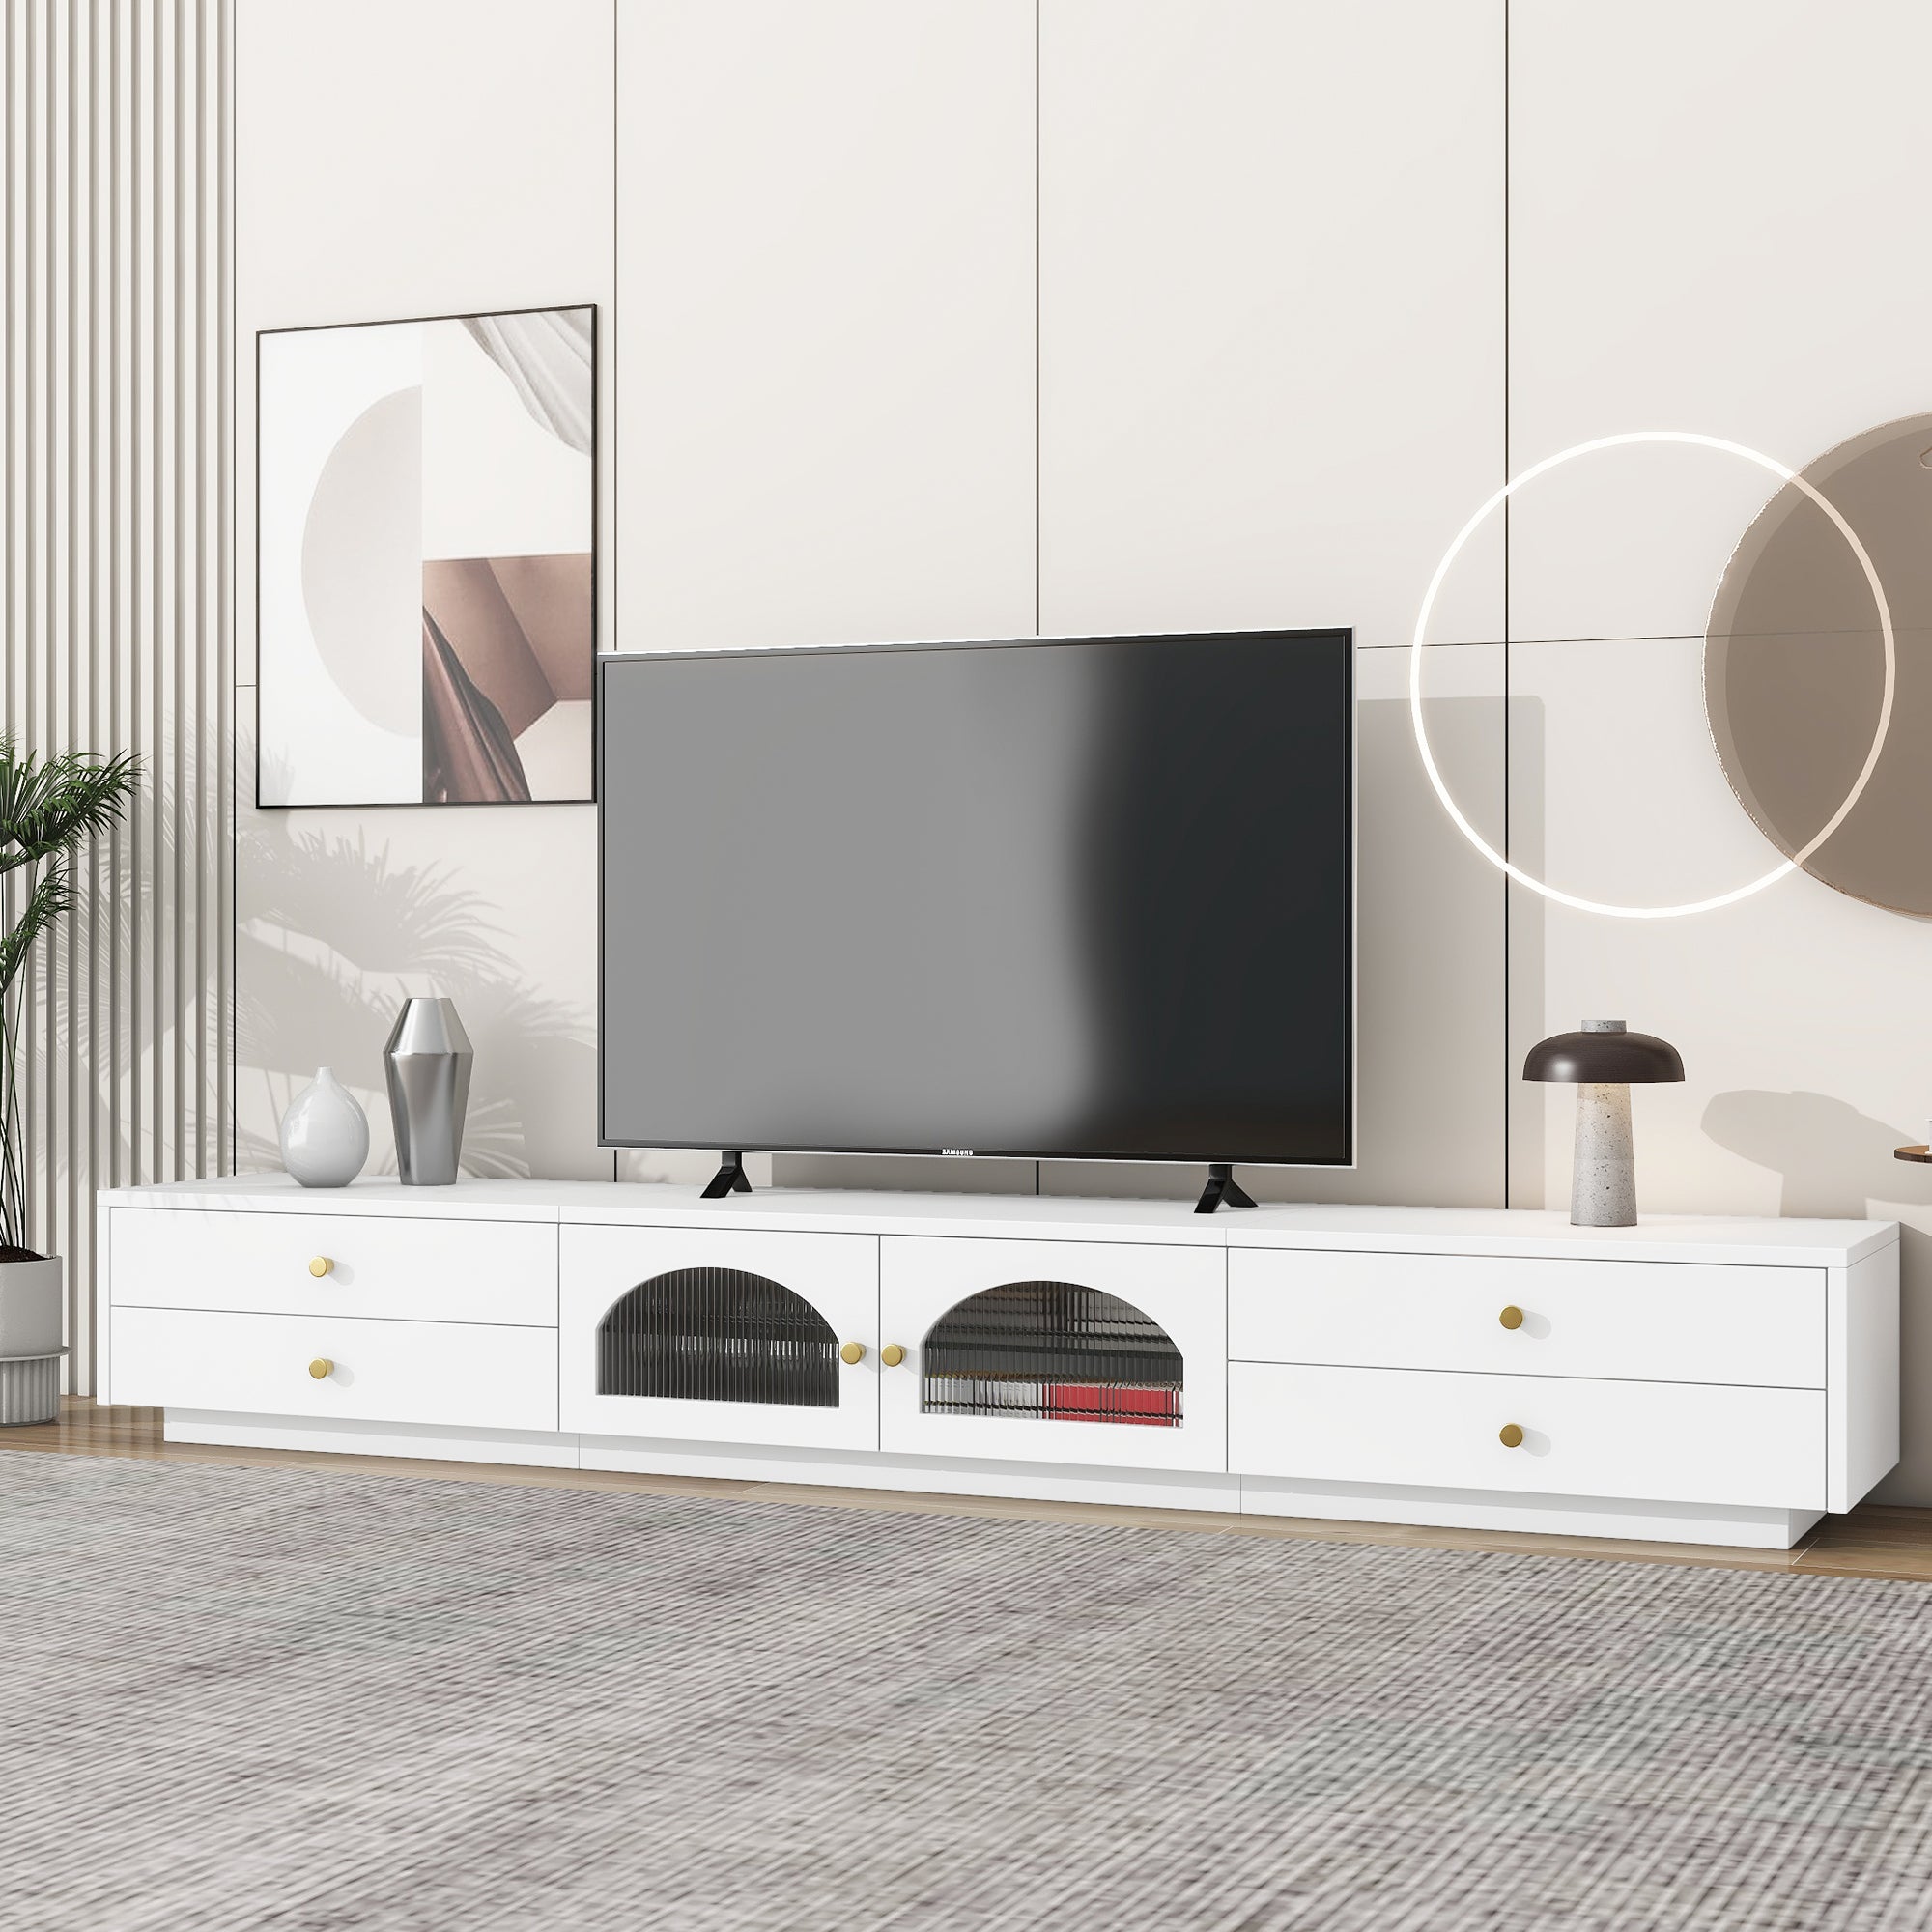 ON TREND Luxurious TV Stand with Fluted Glass Doors white-primary living space-90 inches or